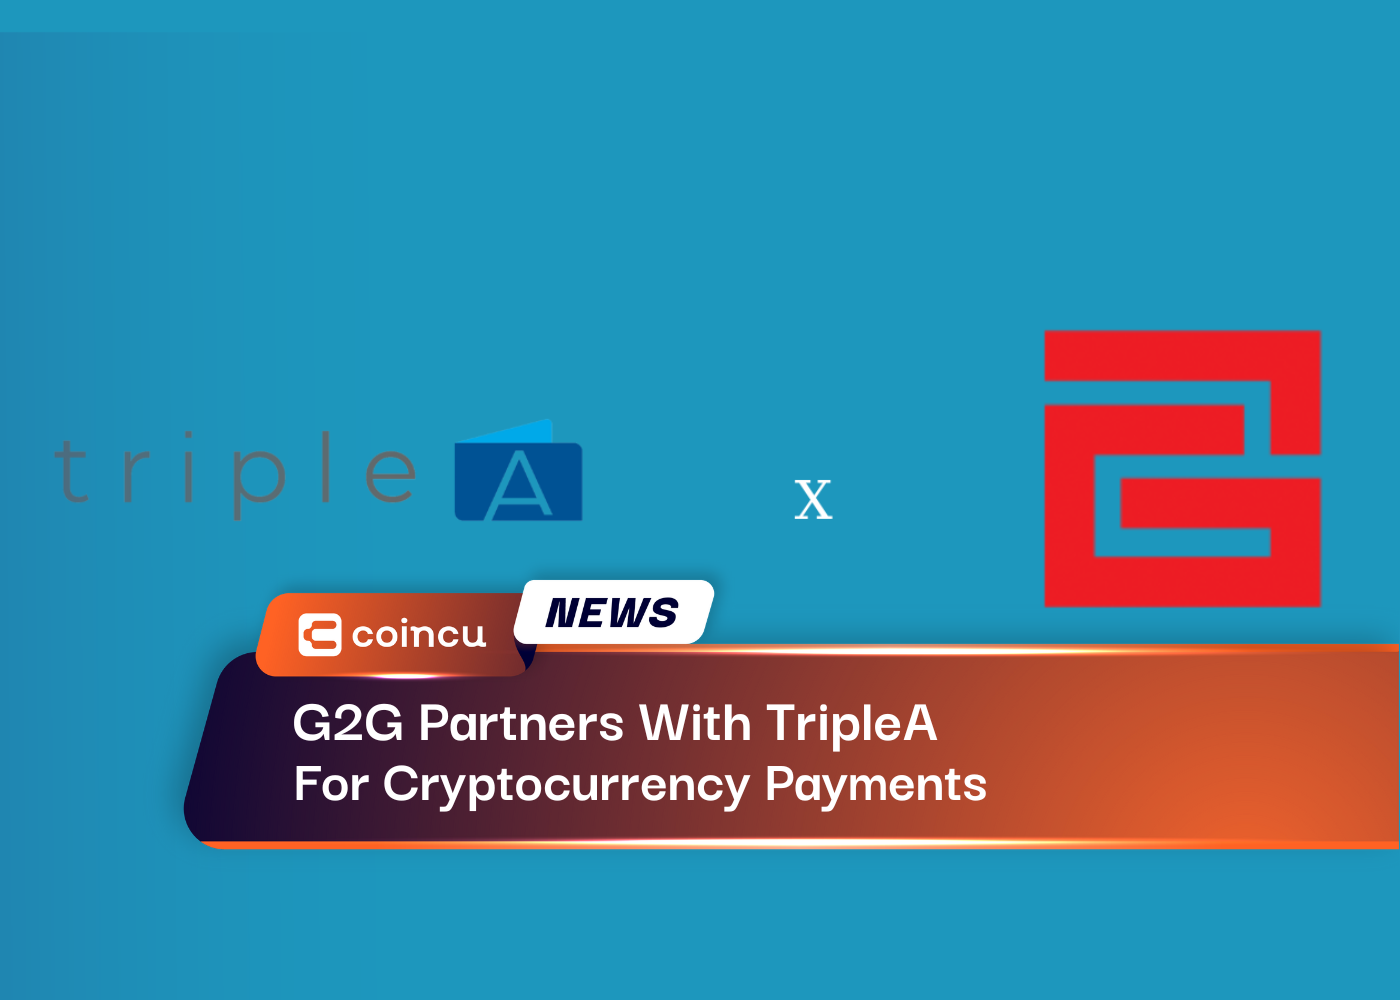 G2G Partners With TripleA